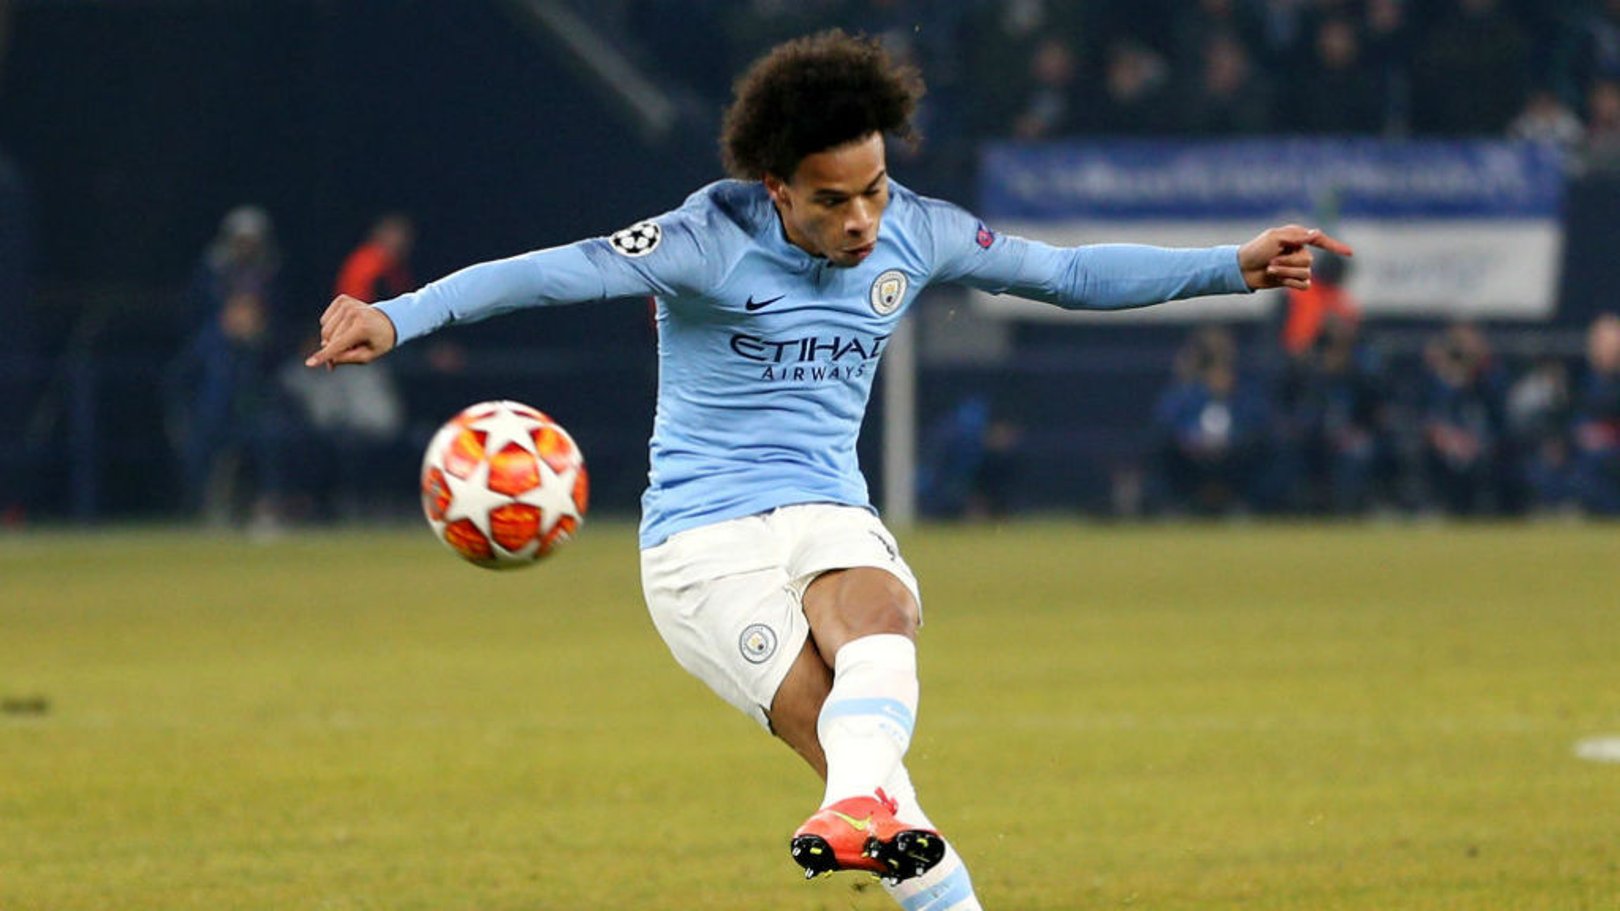 Leroy Sane fires a rocket of a free-kick into the back of the net to draw the score level at 2-2!